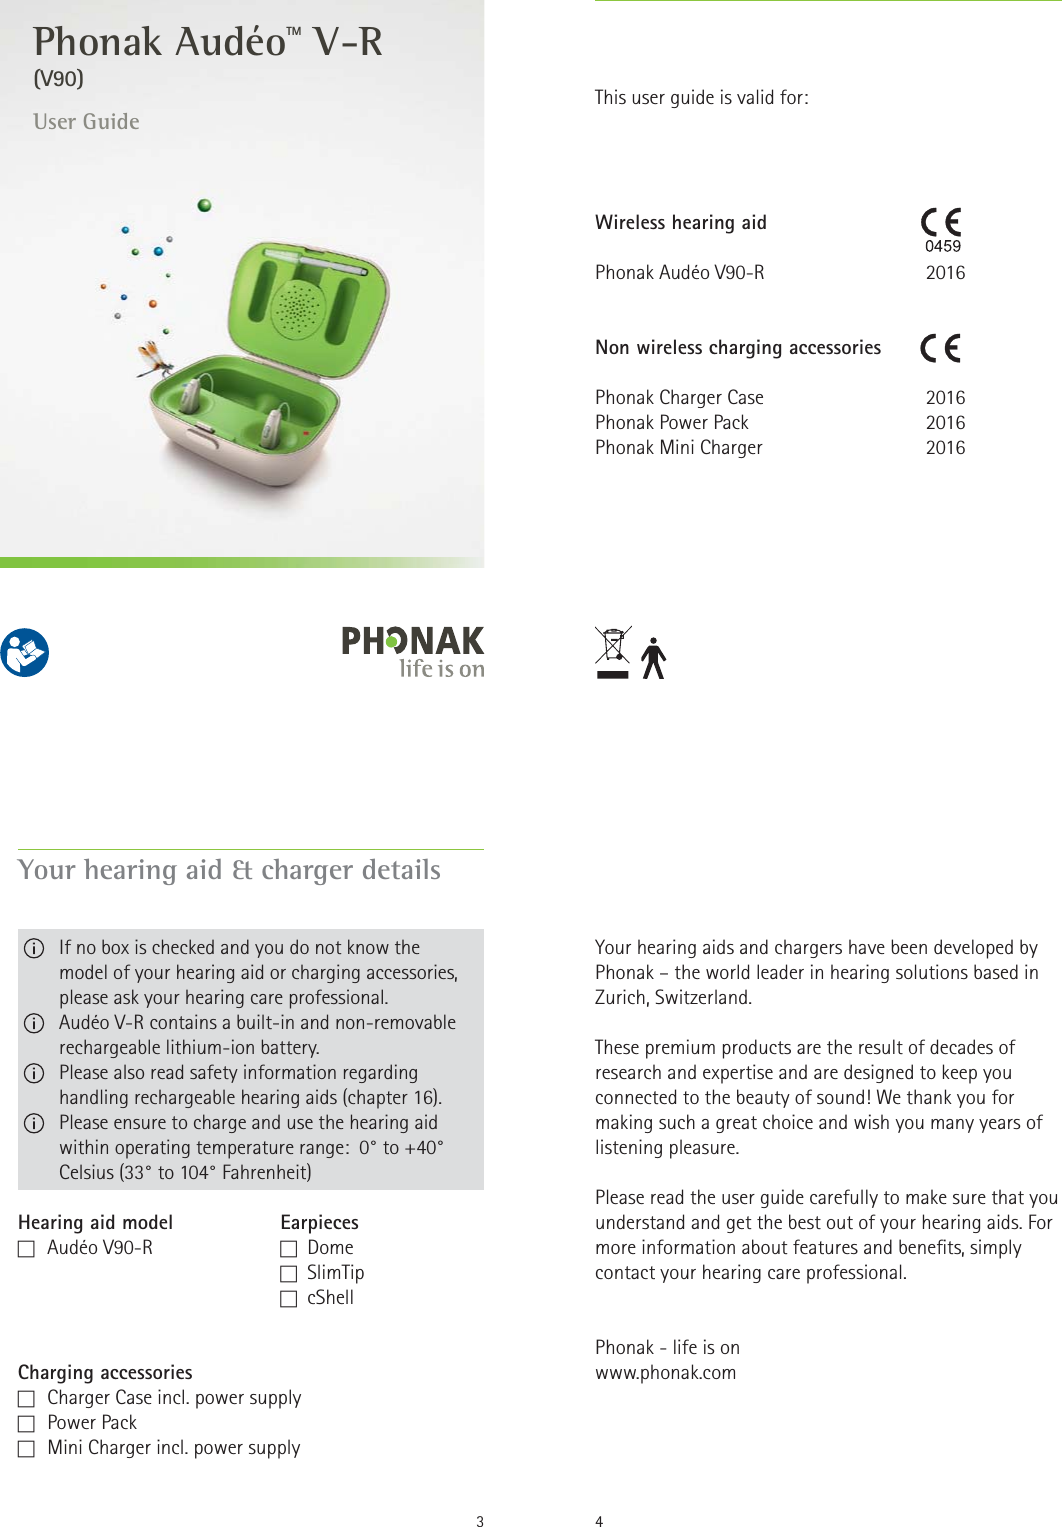 User Guide(V90) Phonak AudéoTM V-R2Wireless hearing aidPhonak Audéo V90-RNon wireless charging accessoriesPhonak Charger CasePhonak Power Pack  Phonak Mini Charger2016 201620162016This user guide is valid for:3Your hearing aid &amp; charger detailsHearing aid model  EarpiecesF   Audéo  V90-R  F  Dome         F  SlimTip  F  cShellCharging accessoriesF   Charger Case incl. power supplyF   Power  PackF   Mini Charger incl. power supply   If no box is checked and you do not know the  model of your hearing aid or charging accessories, please ask your hearing care professional.   Audéo V-R contains a built-in and non-removable rechargeable lithium-ion battery.   Please also read safety information regarding handling rechargeable hearing aids (chapter 16).   Please ensure to charge and use the hearing aid within operating temperature range:  0° to +40° Celsius (33° to 104° Fahrenheit)Your hearing aids and chargers have been developed by Phonak – the world leader in hearing solutions based in Zurich, Switzerland.These premium products are the result of decades of research and expertise and are designed to keep you connected to the beauty of sound! We thank you for making such a great choice and wish you many years of listening pleasure.Please read the user guide carefully to make sure that you understand and get the best out of your hearing aids. For more information about features and benets, simply contact your hearing care professional.Phonak - life is onwww.phonak.com4